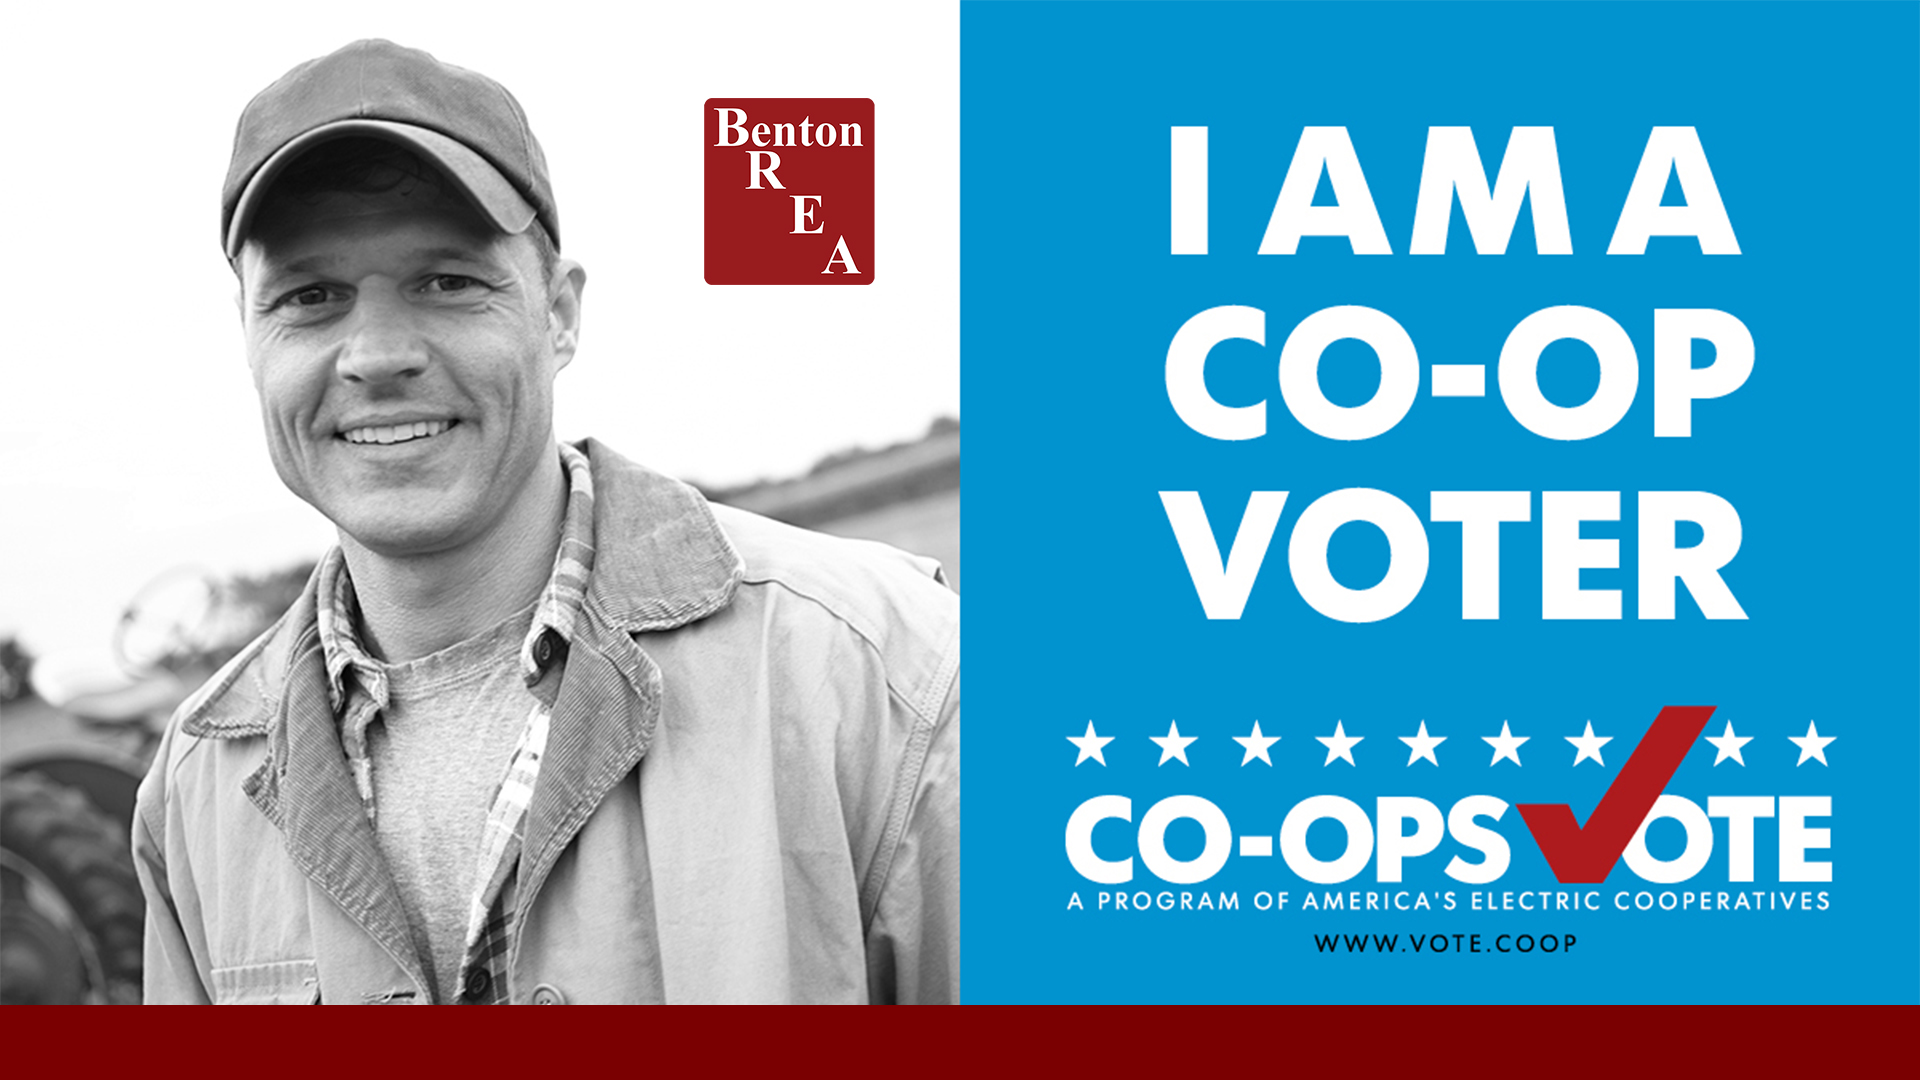 Co-opsVote Ad with man wearing a ball cap smiling at the camera- I am a Co-op Voter